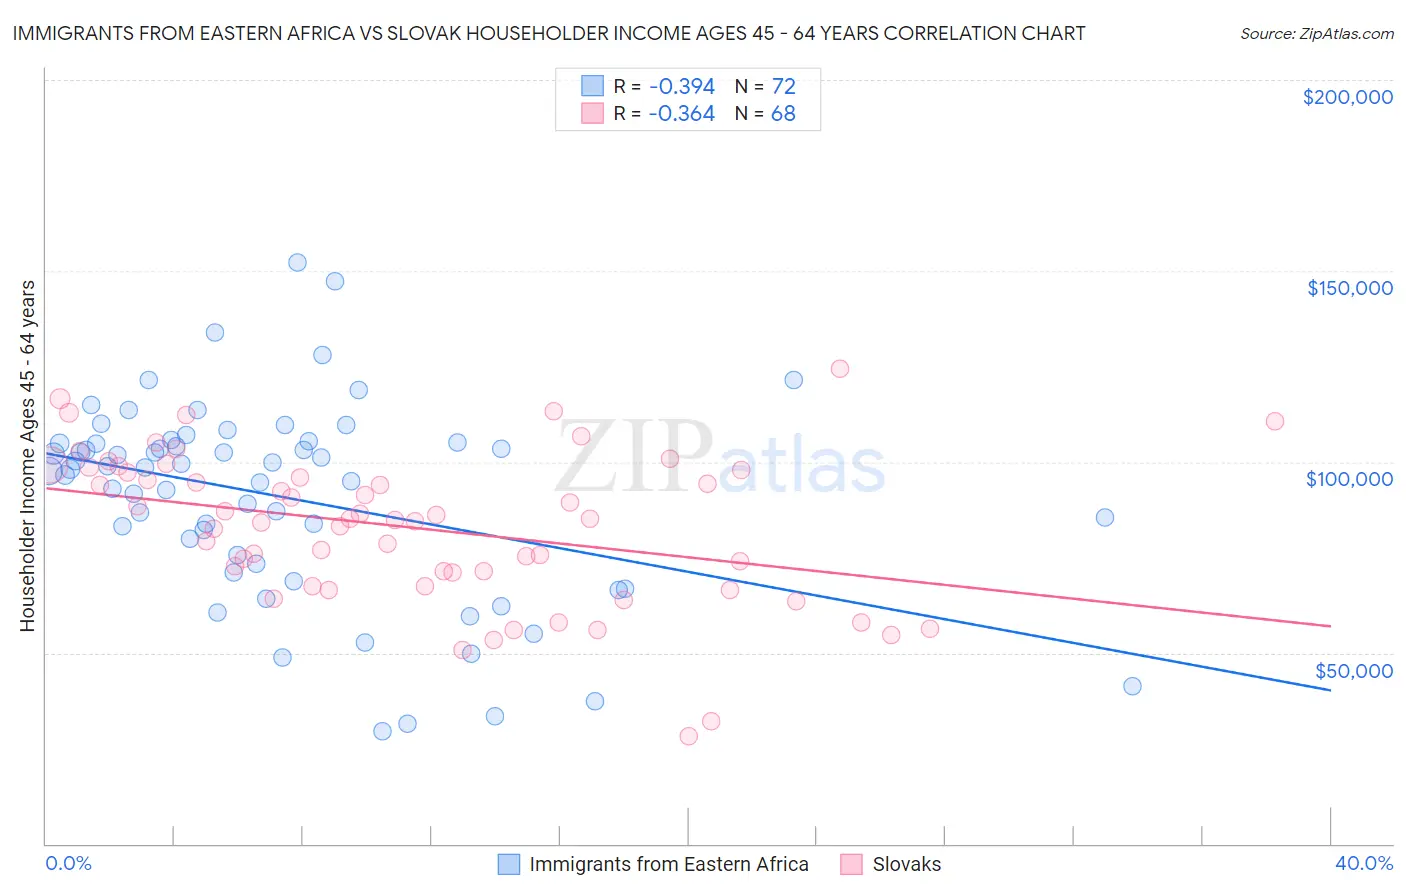 Immigrants from Eastern Africa vs Slovak Householder Income Ages 45 - 64 years